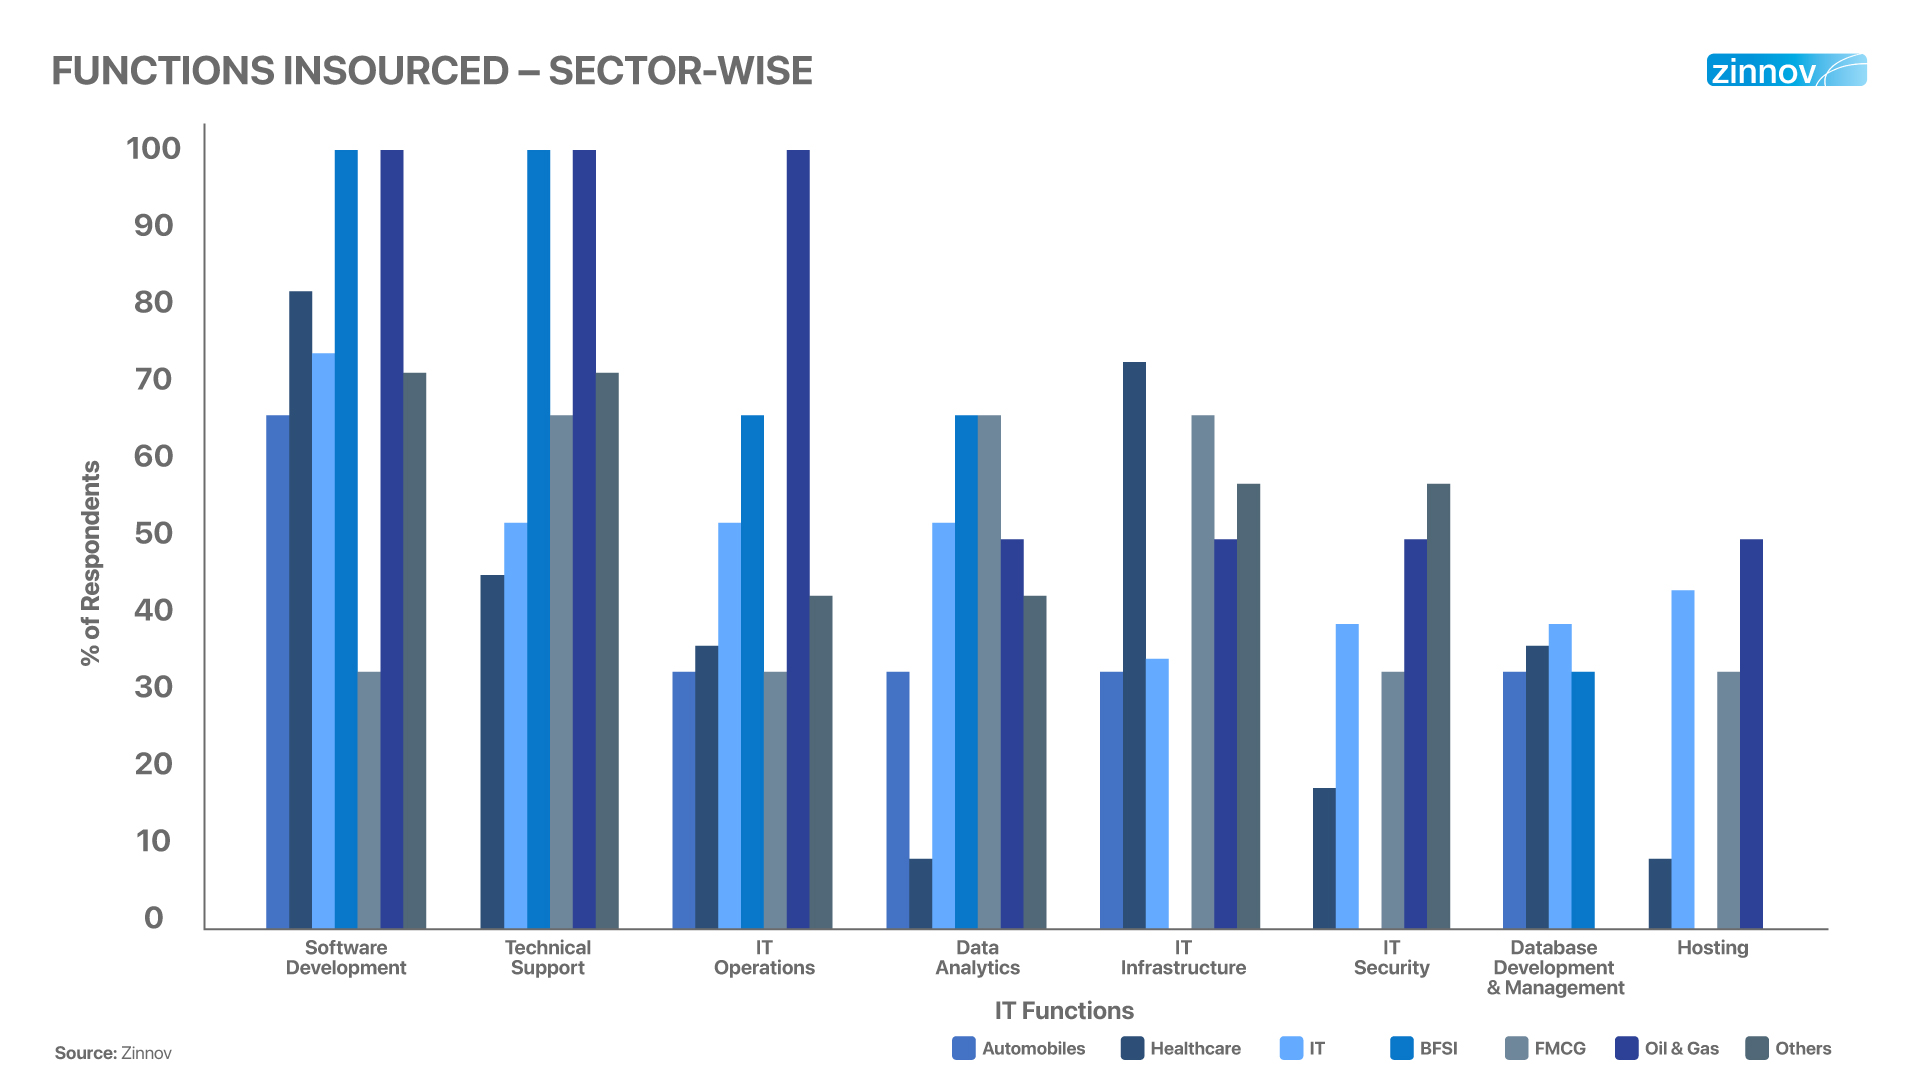 Functions insourced sector wise